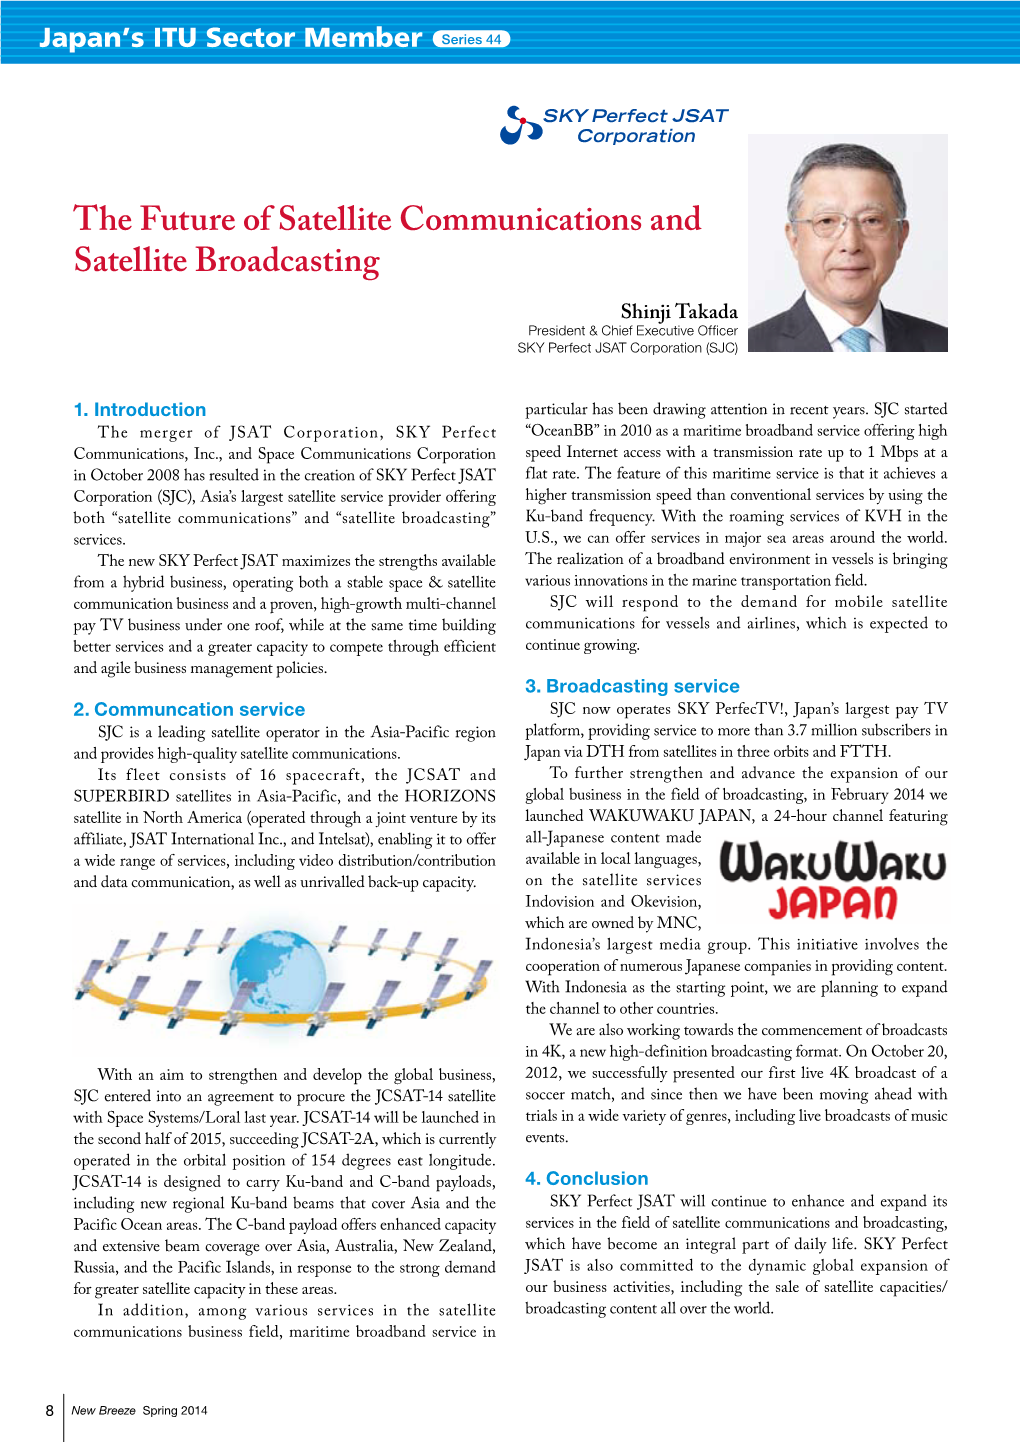 The Future of Satellite Communications and Satellite Broadcasting